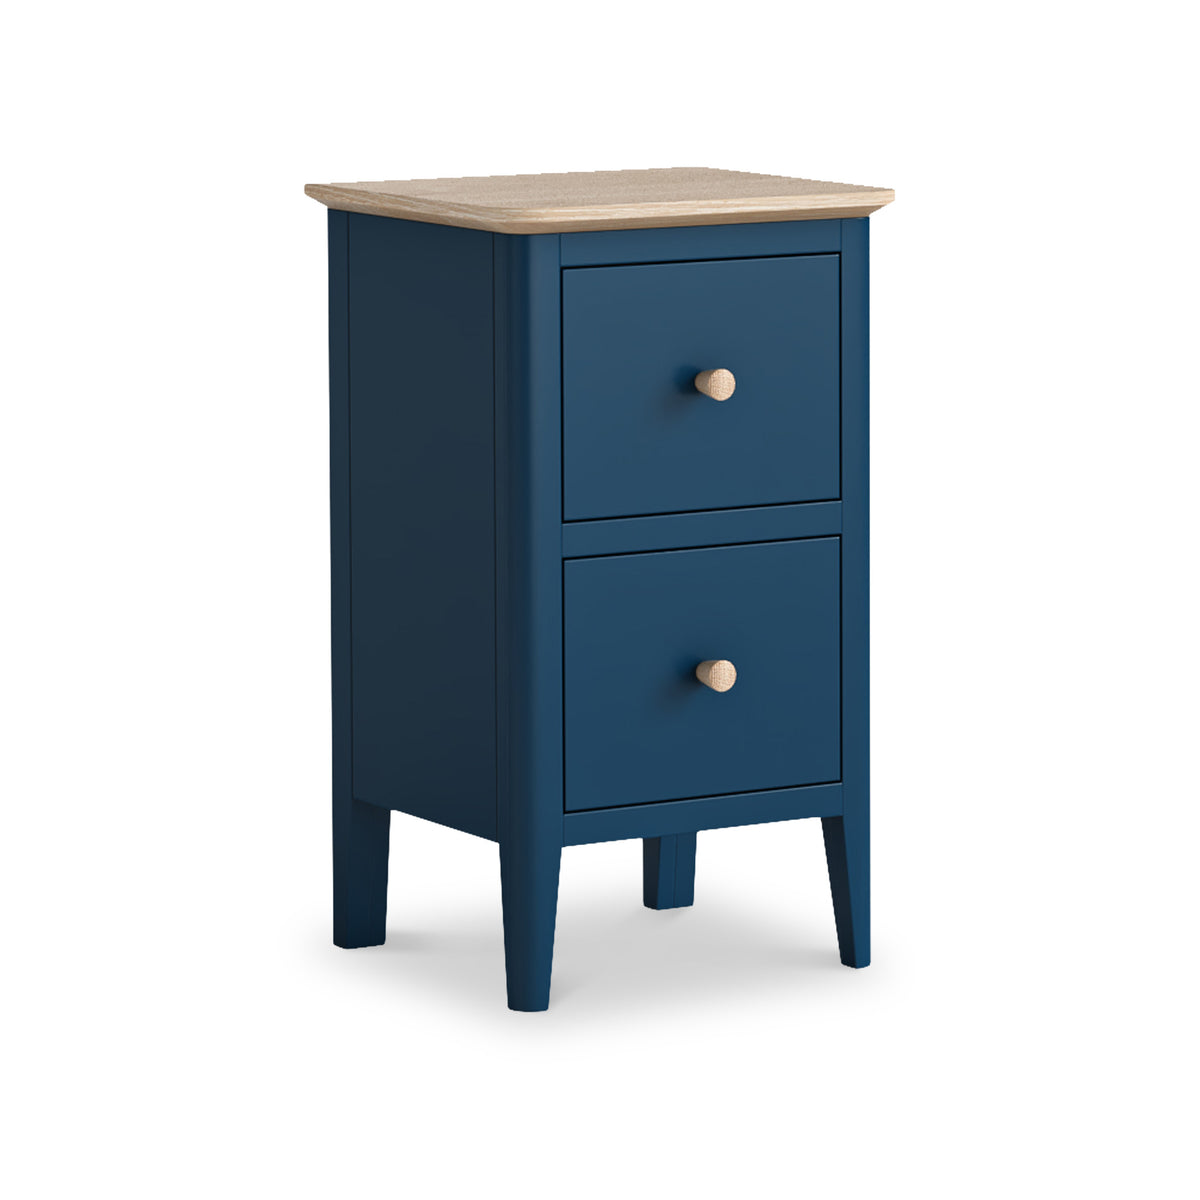 Penrose Navy blue Narrow Bedside Table with wooden handles from Roseland Furniture